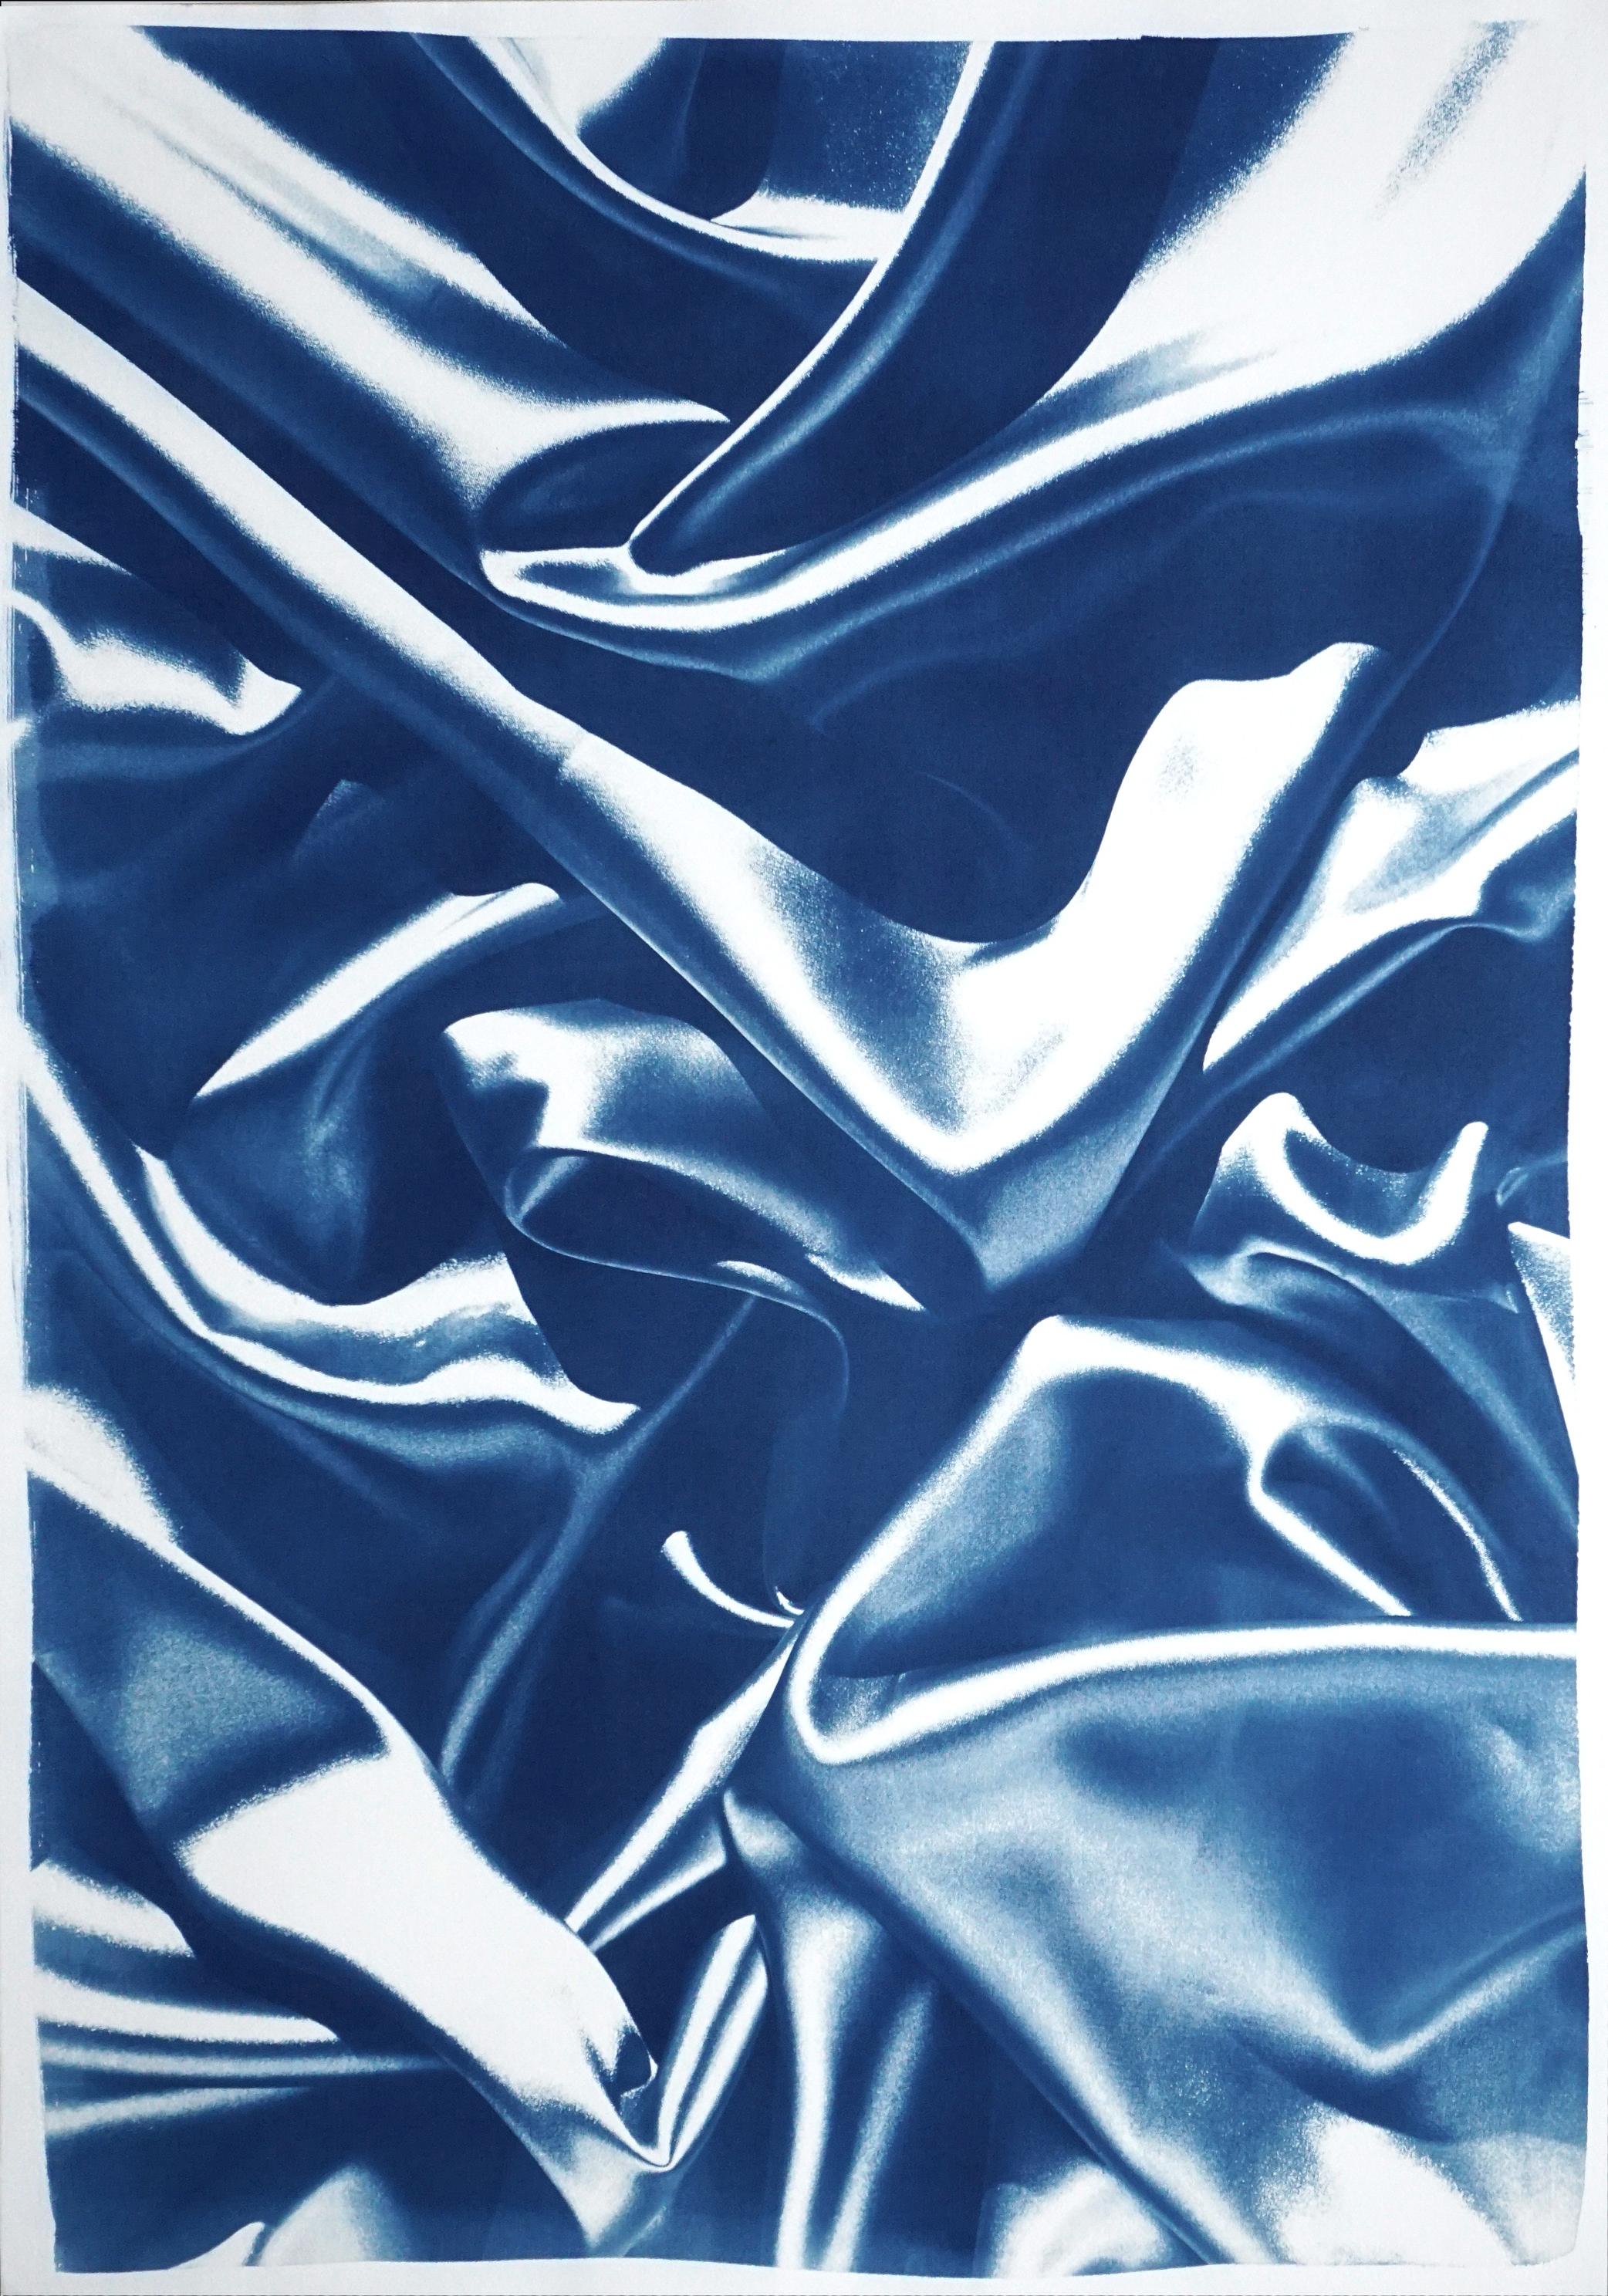 Kind of Cyan Interior Art - Sculptured Marble in Classic Blue, Extra Large Cyanotype Print, Abstract Silk 